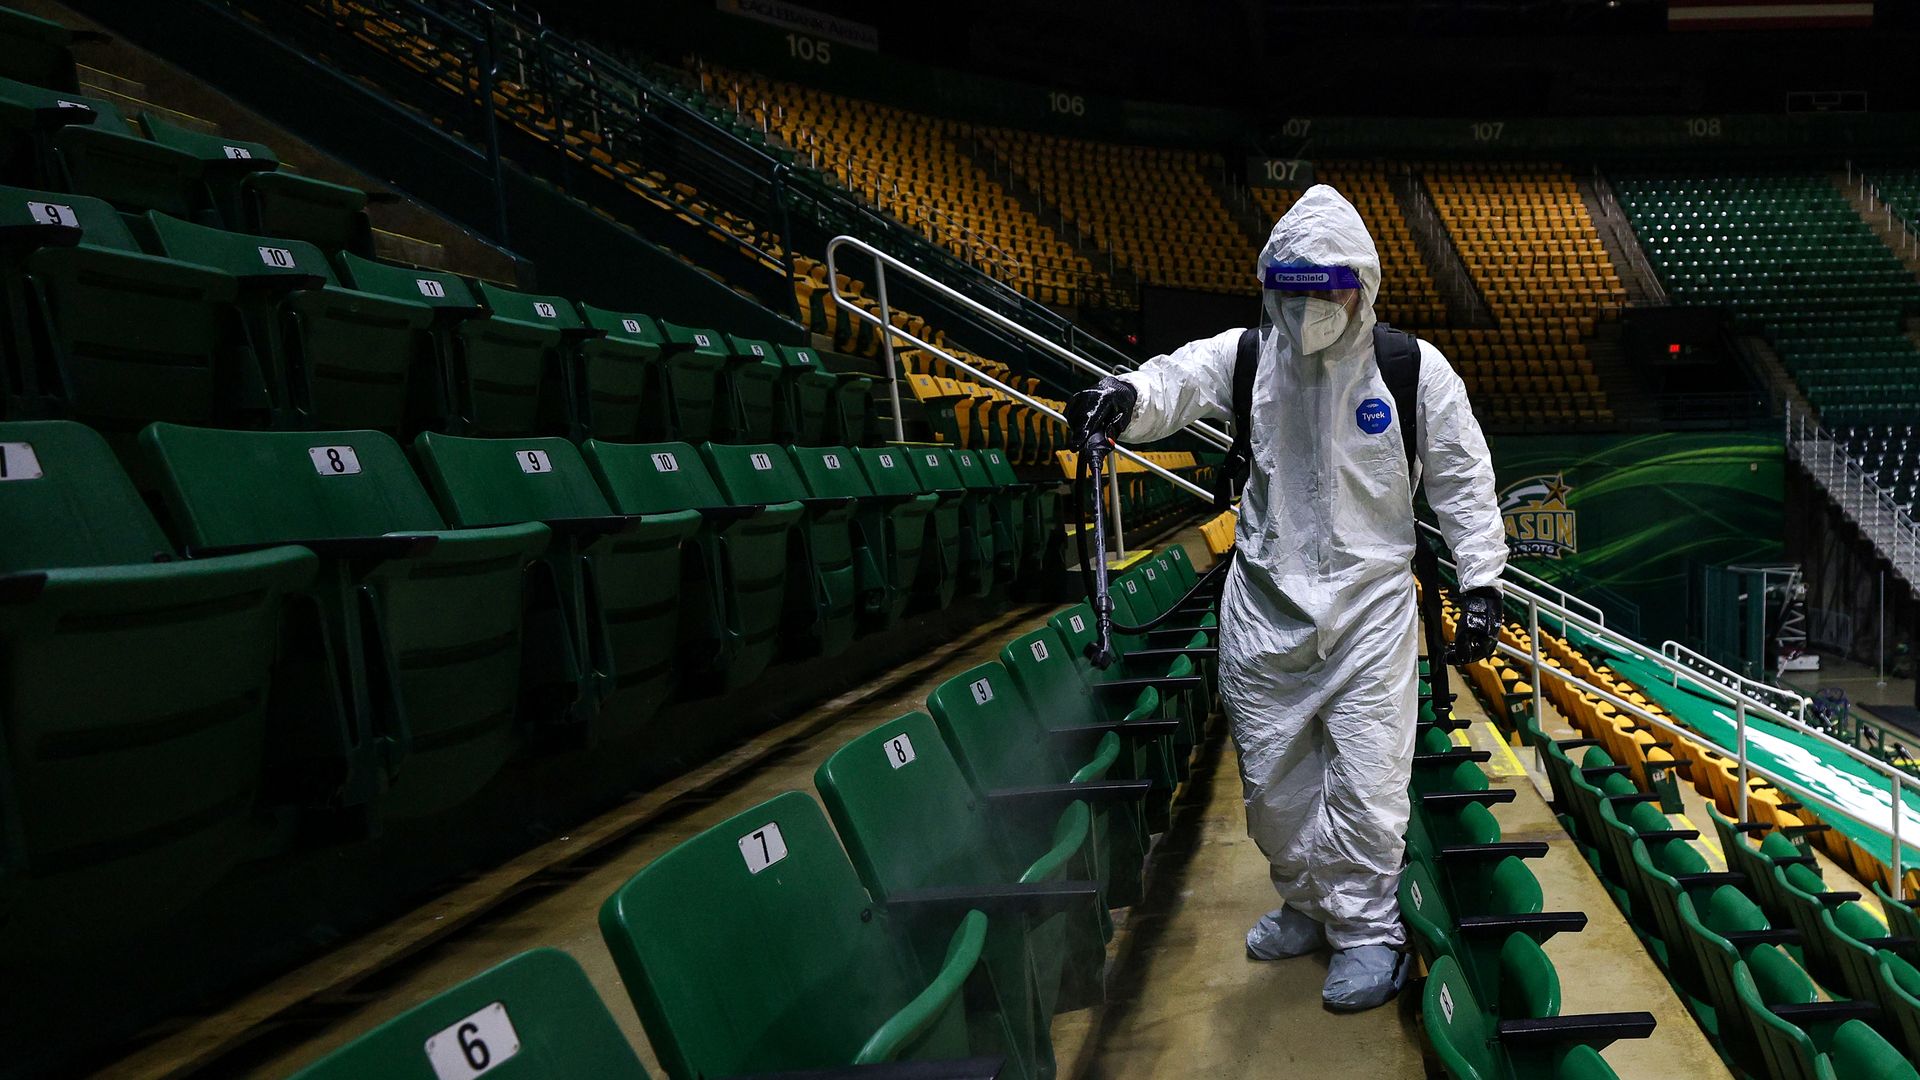 A person sanitizing seats at George Mason University in Fairfax, Virginia, in January 2021.